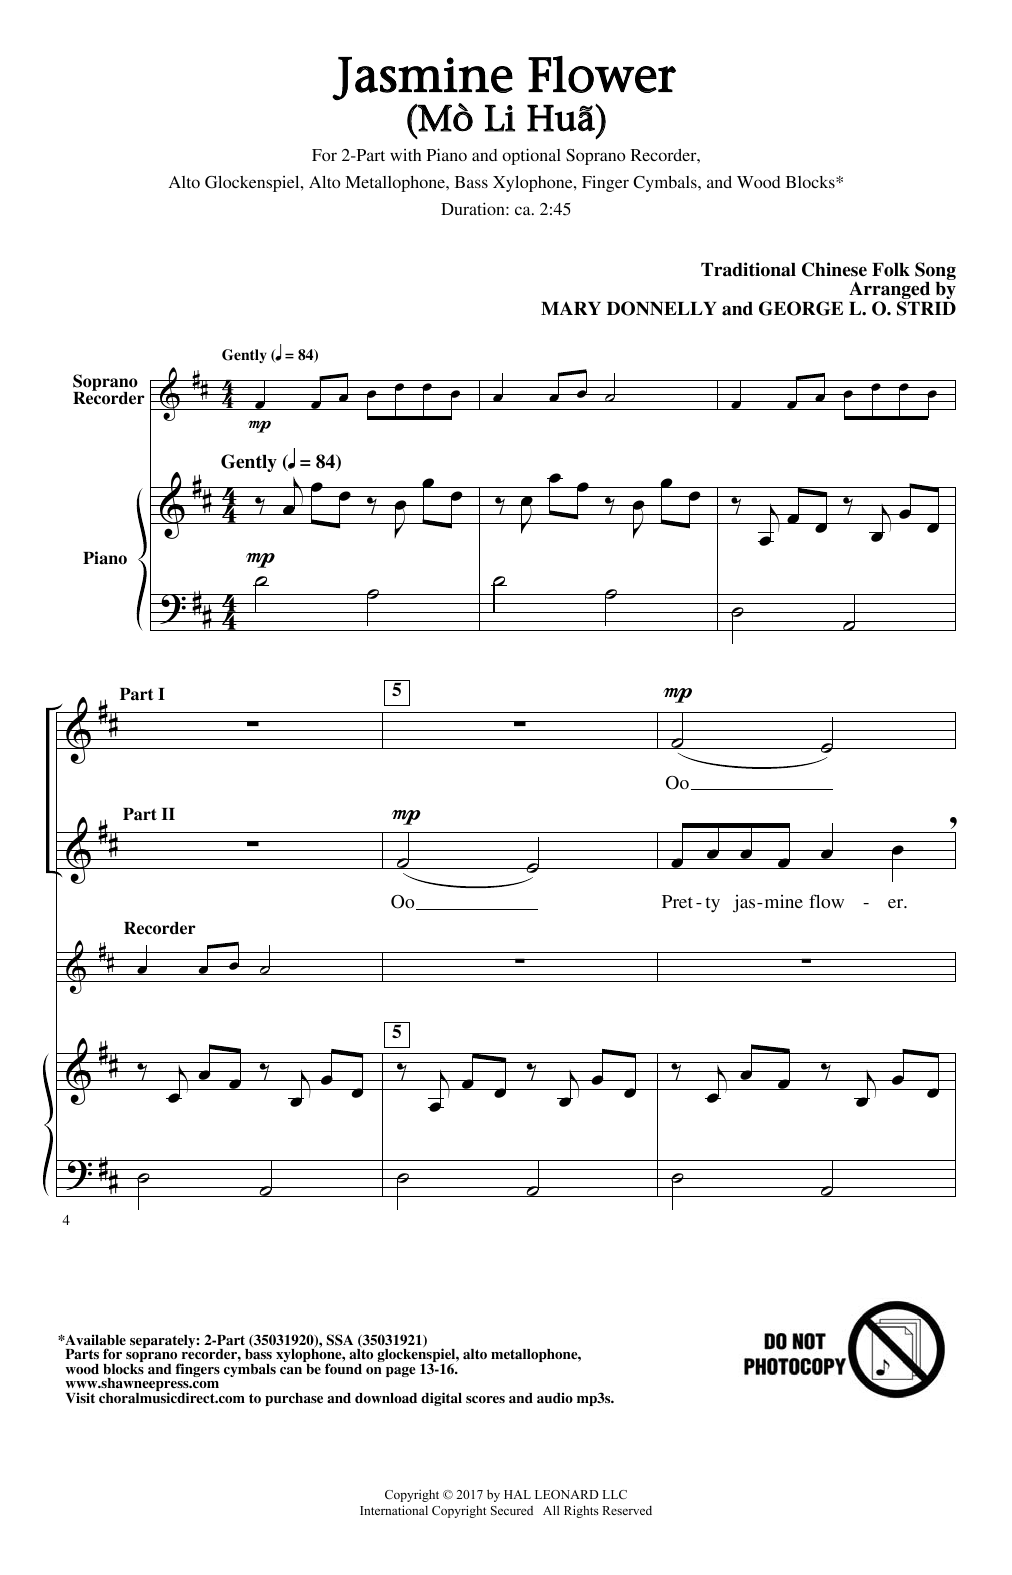 Download Mary Donnelly Jasmine Flower (Mo Li Hua) Sheet Music